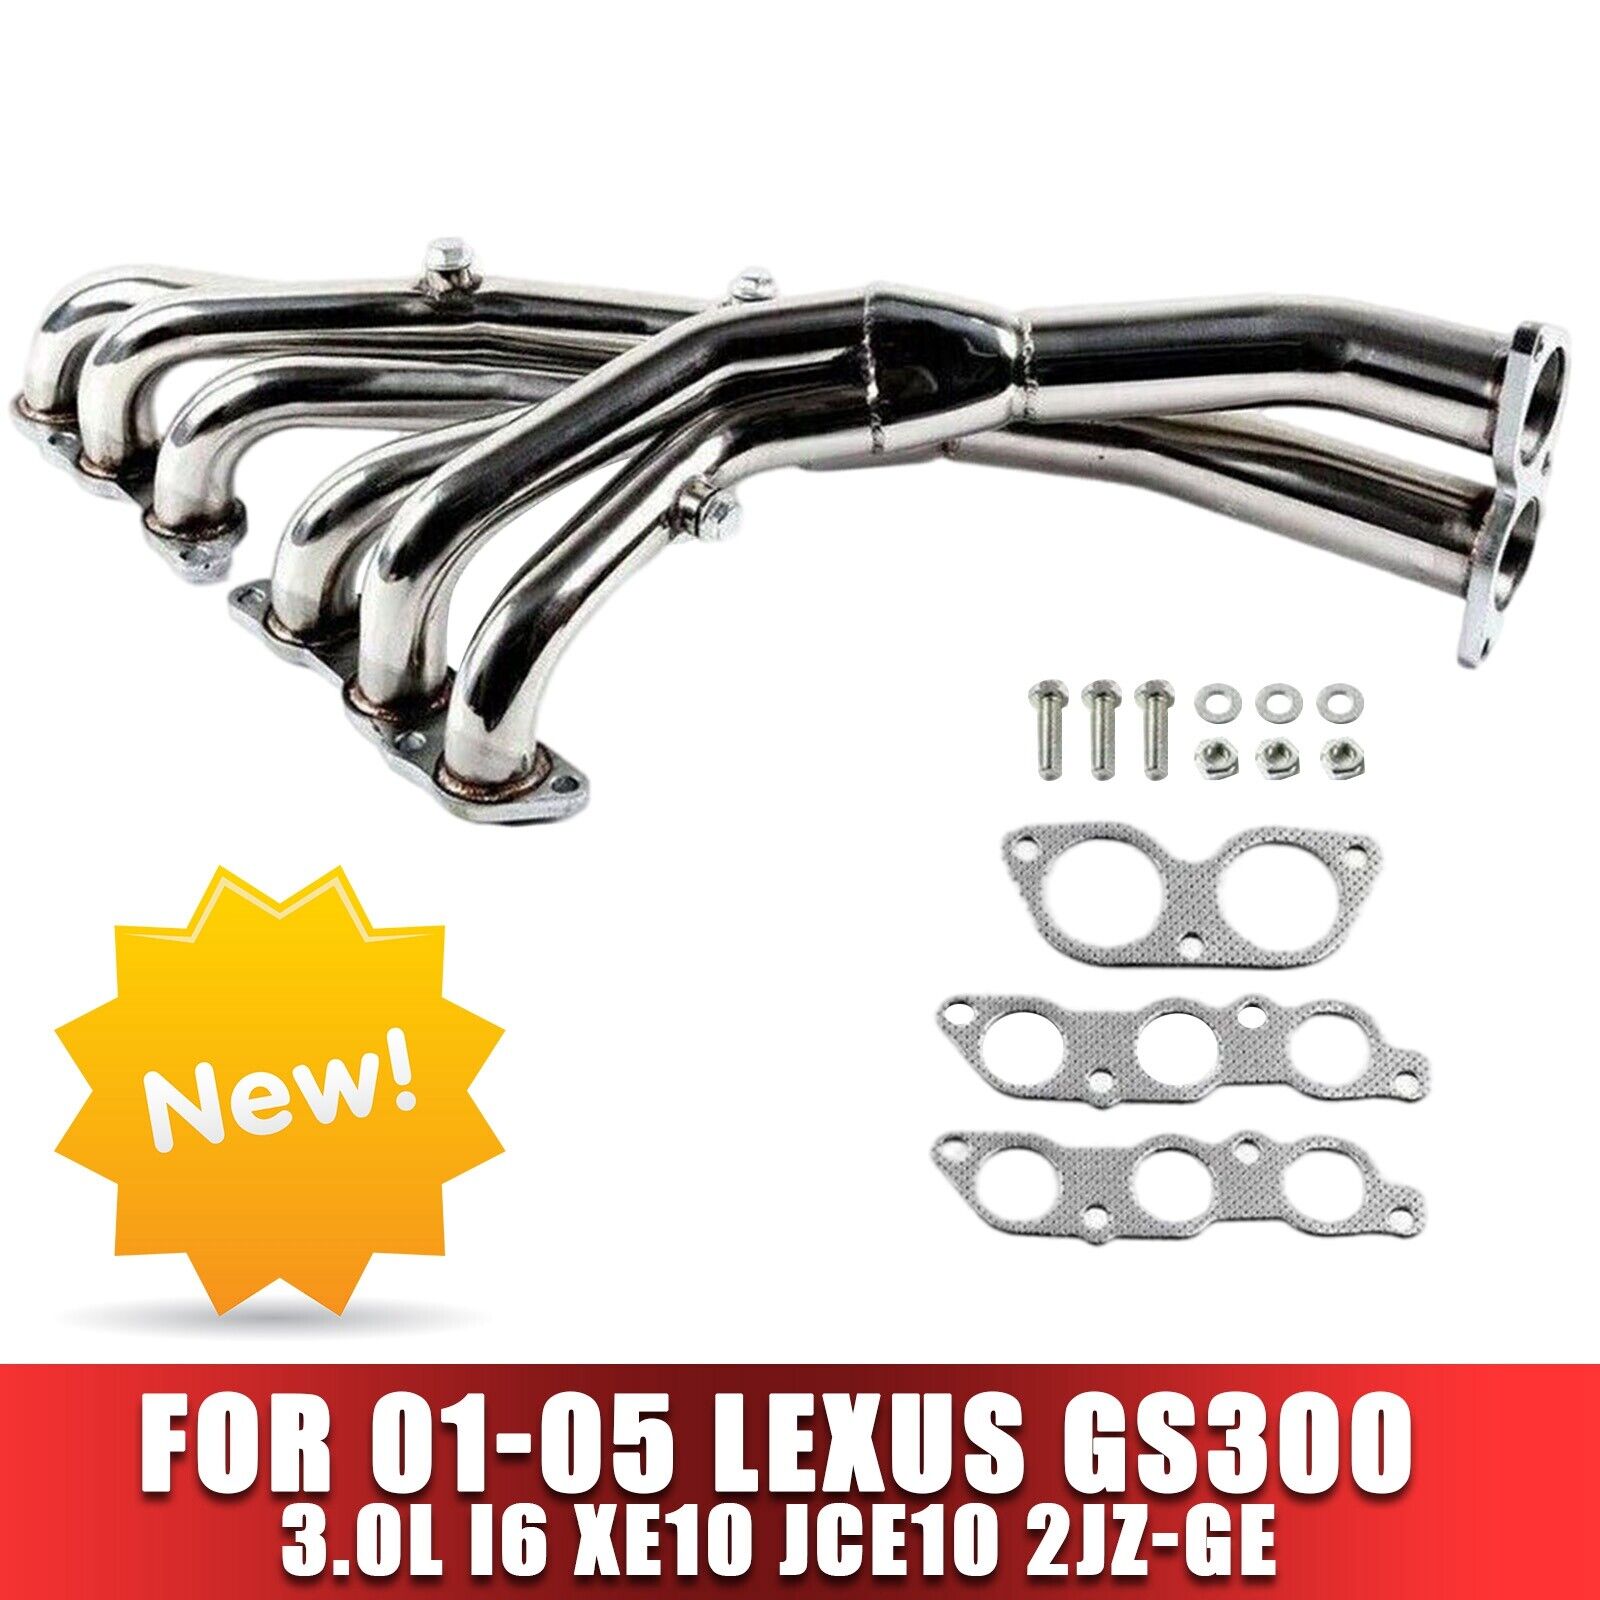 For Lexus IS300 01-05 3.0L 2JX-GE Stainless Steel Manifold Headers